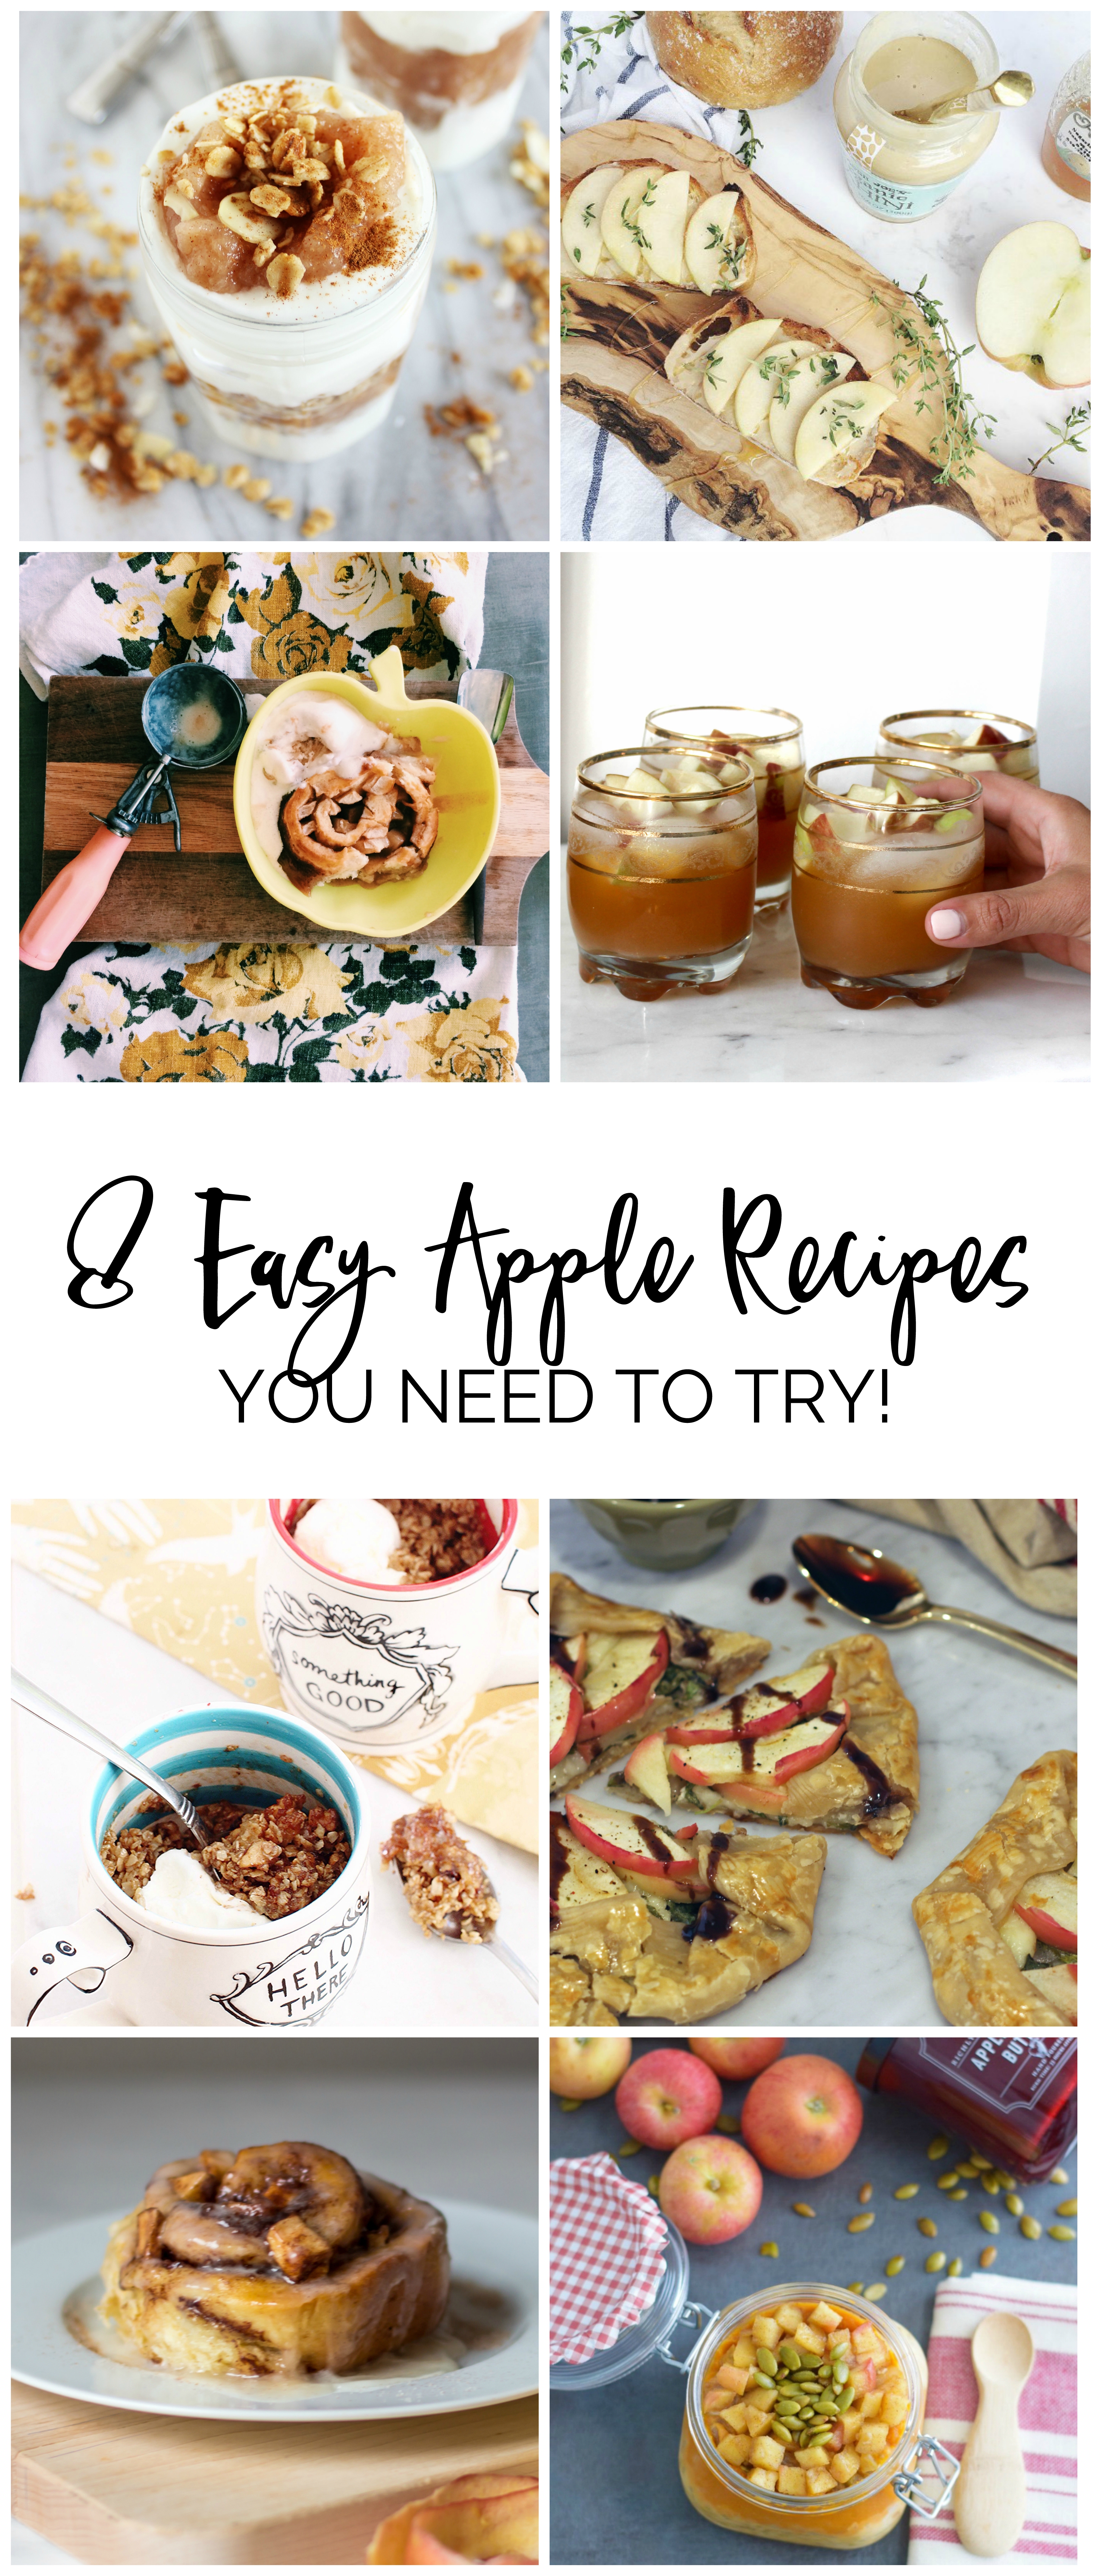 you ned to try these 8 easy recipes! From cinnamon bun hack, to apple sangria, all that you need is on this list!  #applebaking #apple  